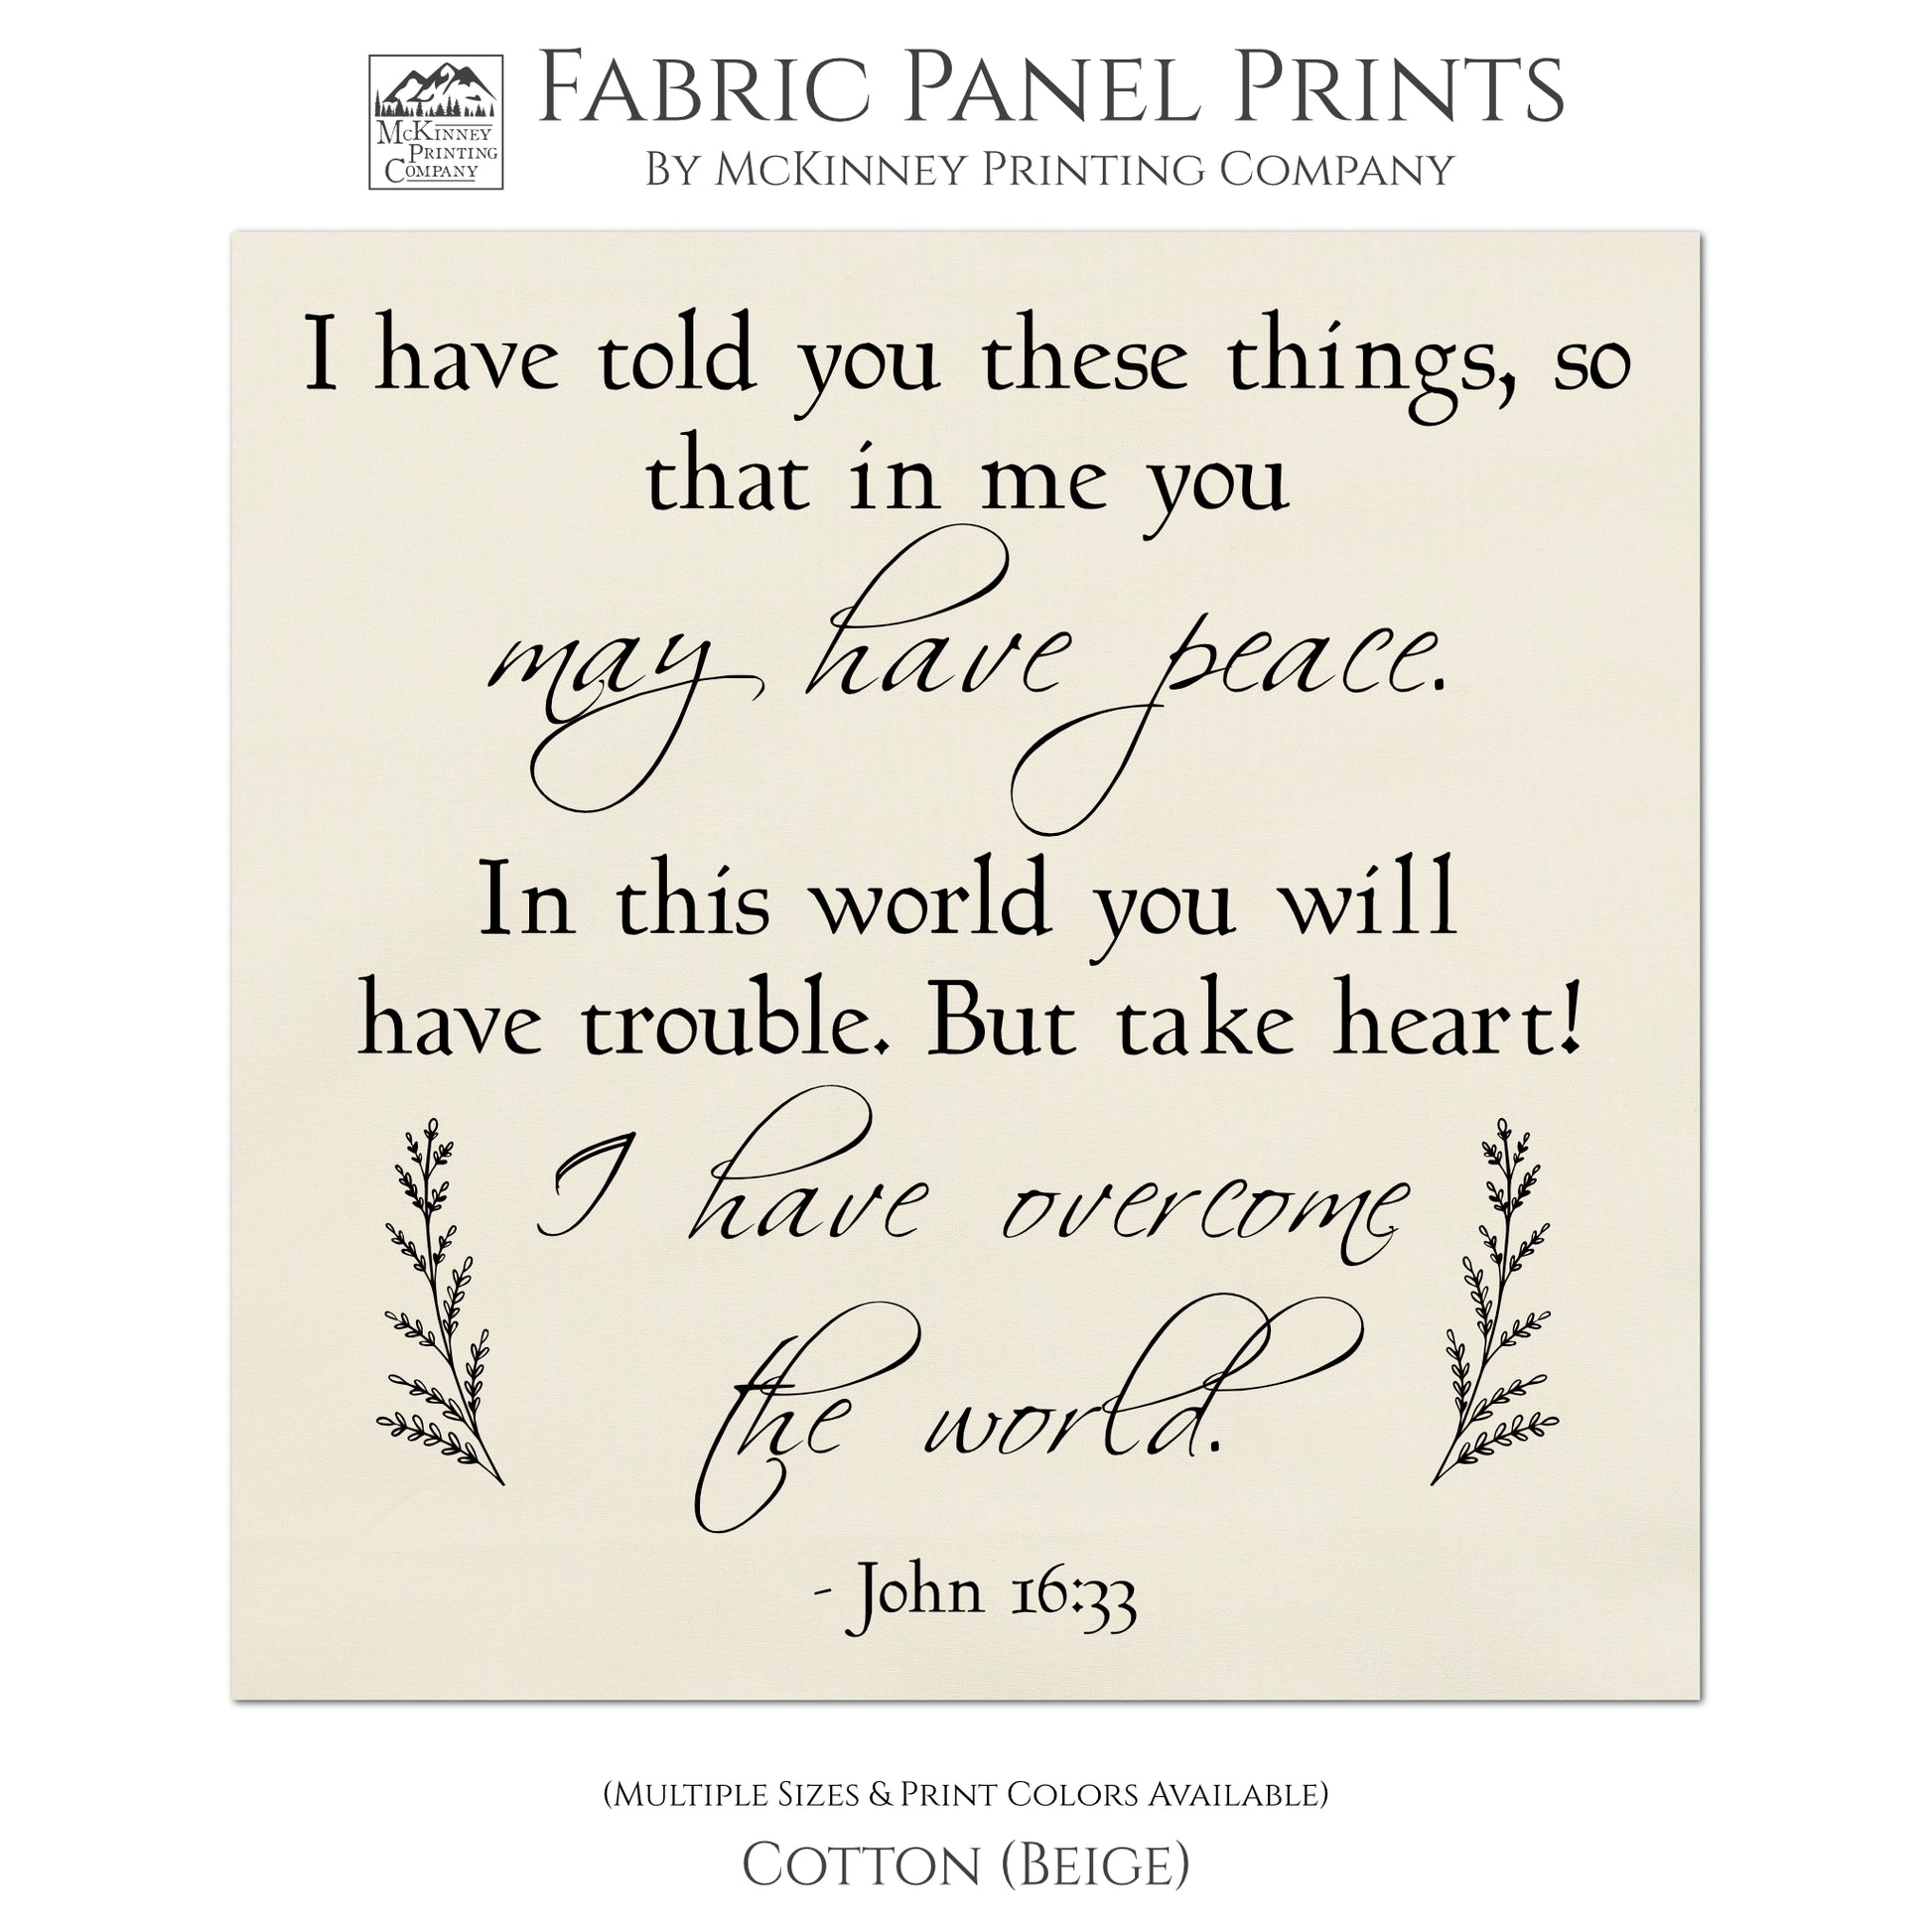 I have told you these things, so that in me you may have peace. In this world you will have trouble. But take heart! I have overcome the world. -John 16 33, Fabric Panel Print, Quilt Block, Bible Verse Wall Art - Cotton